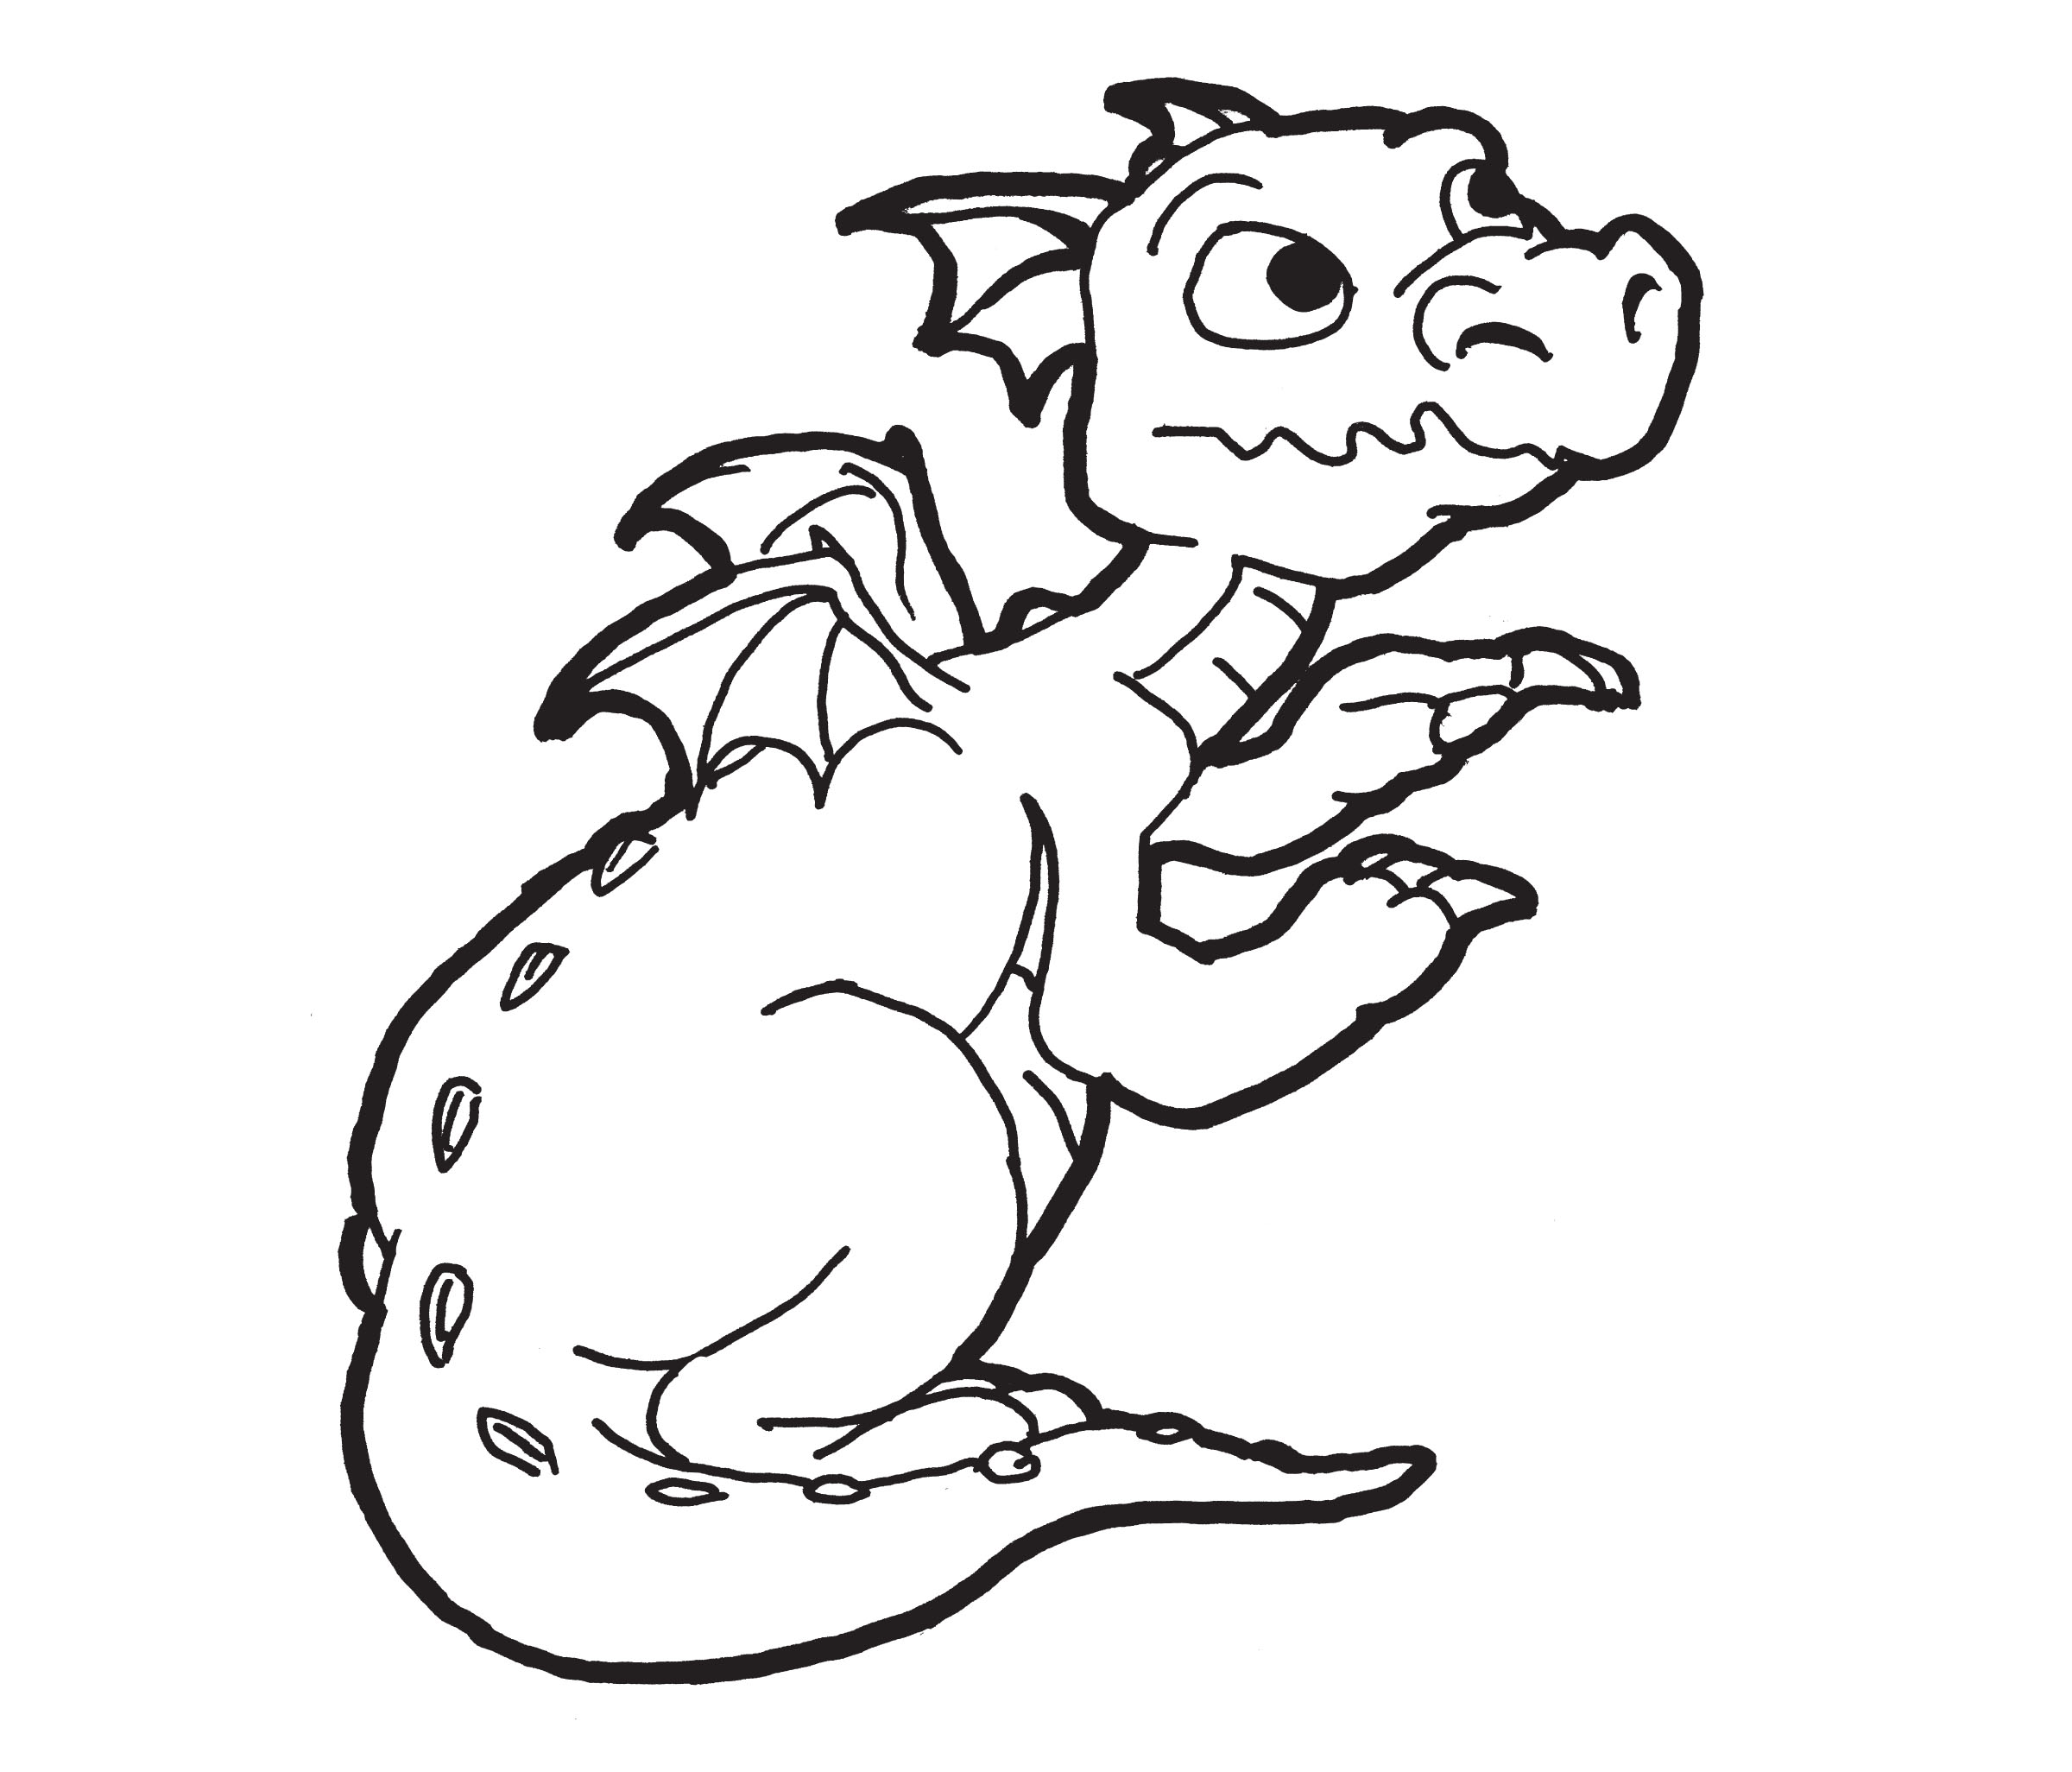 Free Printable Dragon Coloring Pages For Kids - ClipArt Best ...